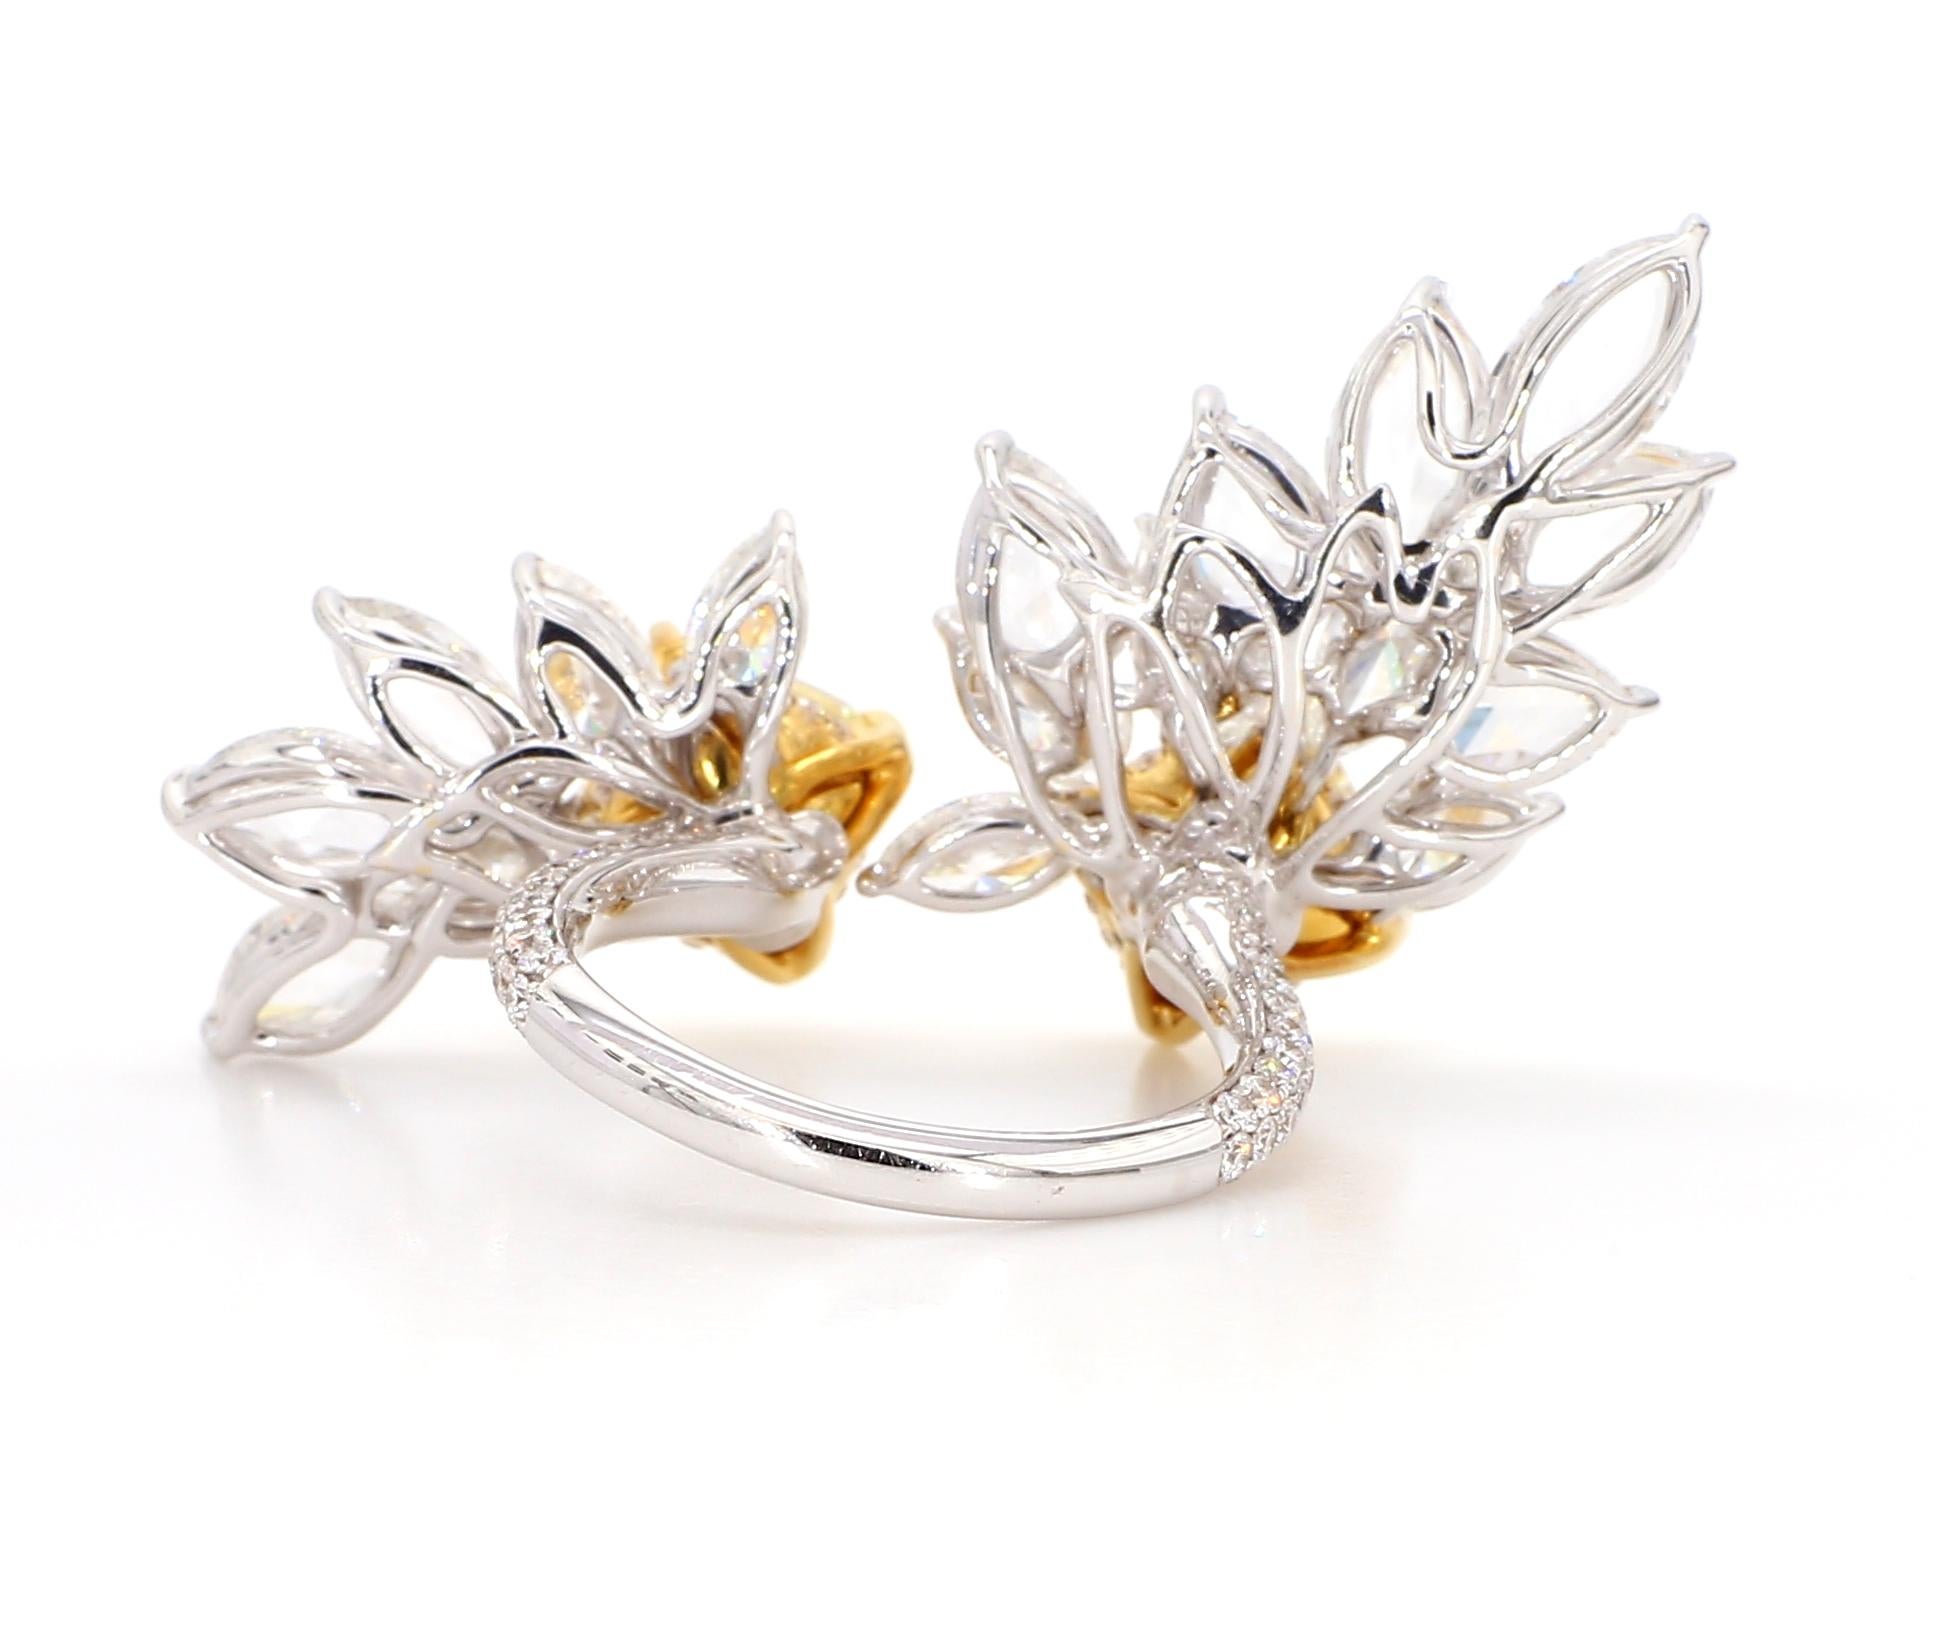 Cushion Cut 4 Carat Fancy Yellow Diamond Floral Cluster Ring 22K & 18K Gold, GIA Report  For Sale